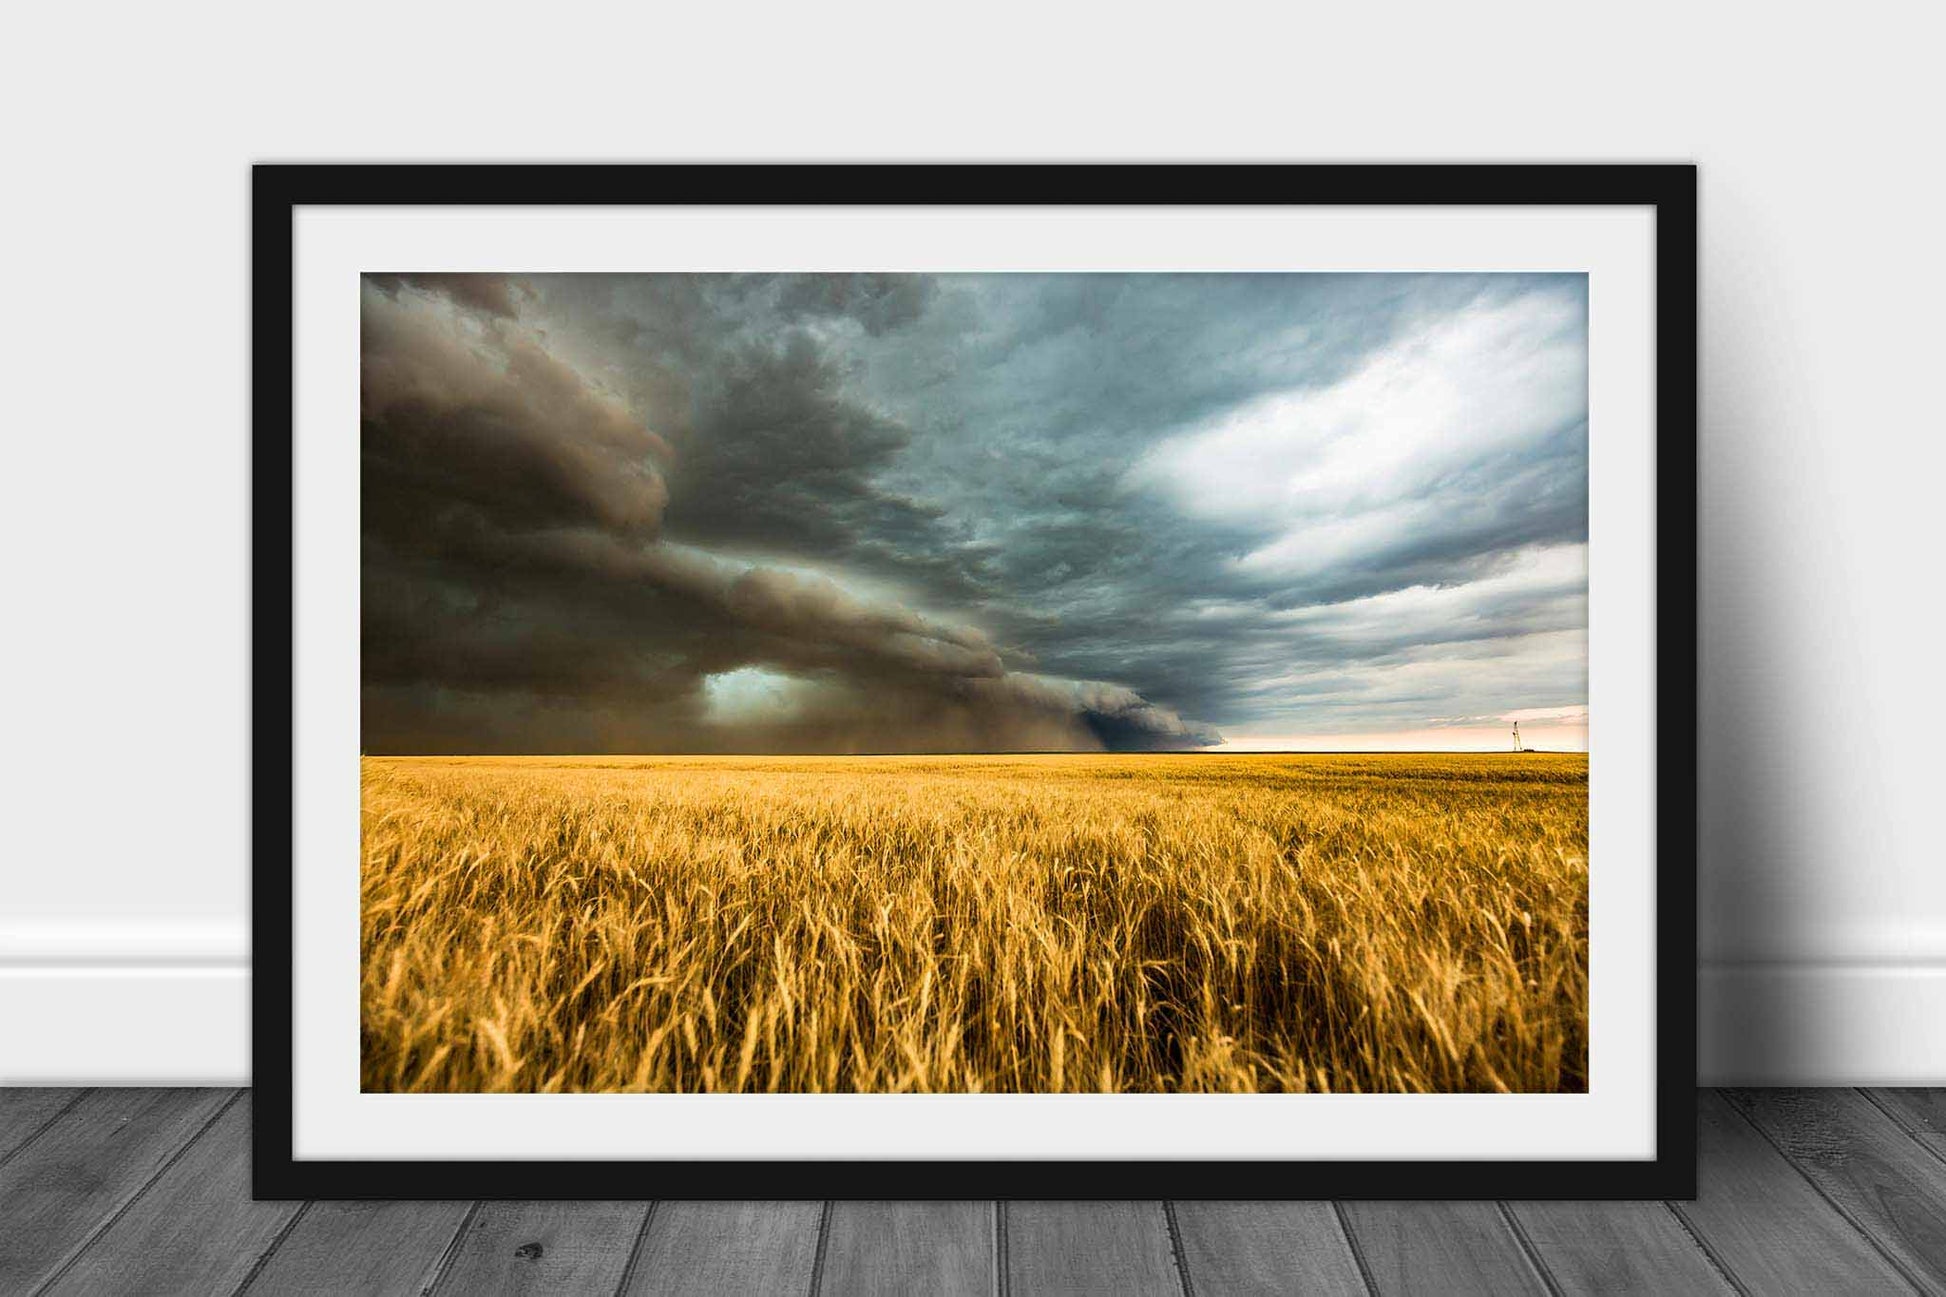 Framed storm print of a thunderstorm over a golden wheat field on a stormy spring day on the plains of Colorado by Sean Ramsey of Southern Plains Photography.